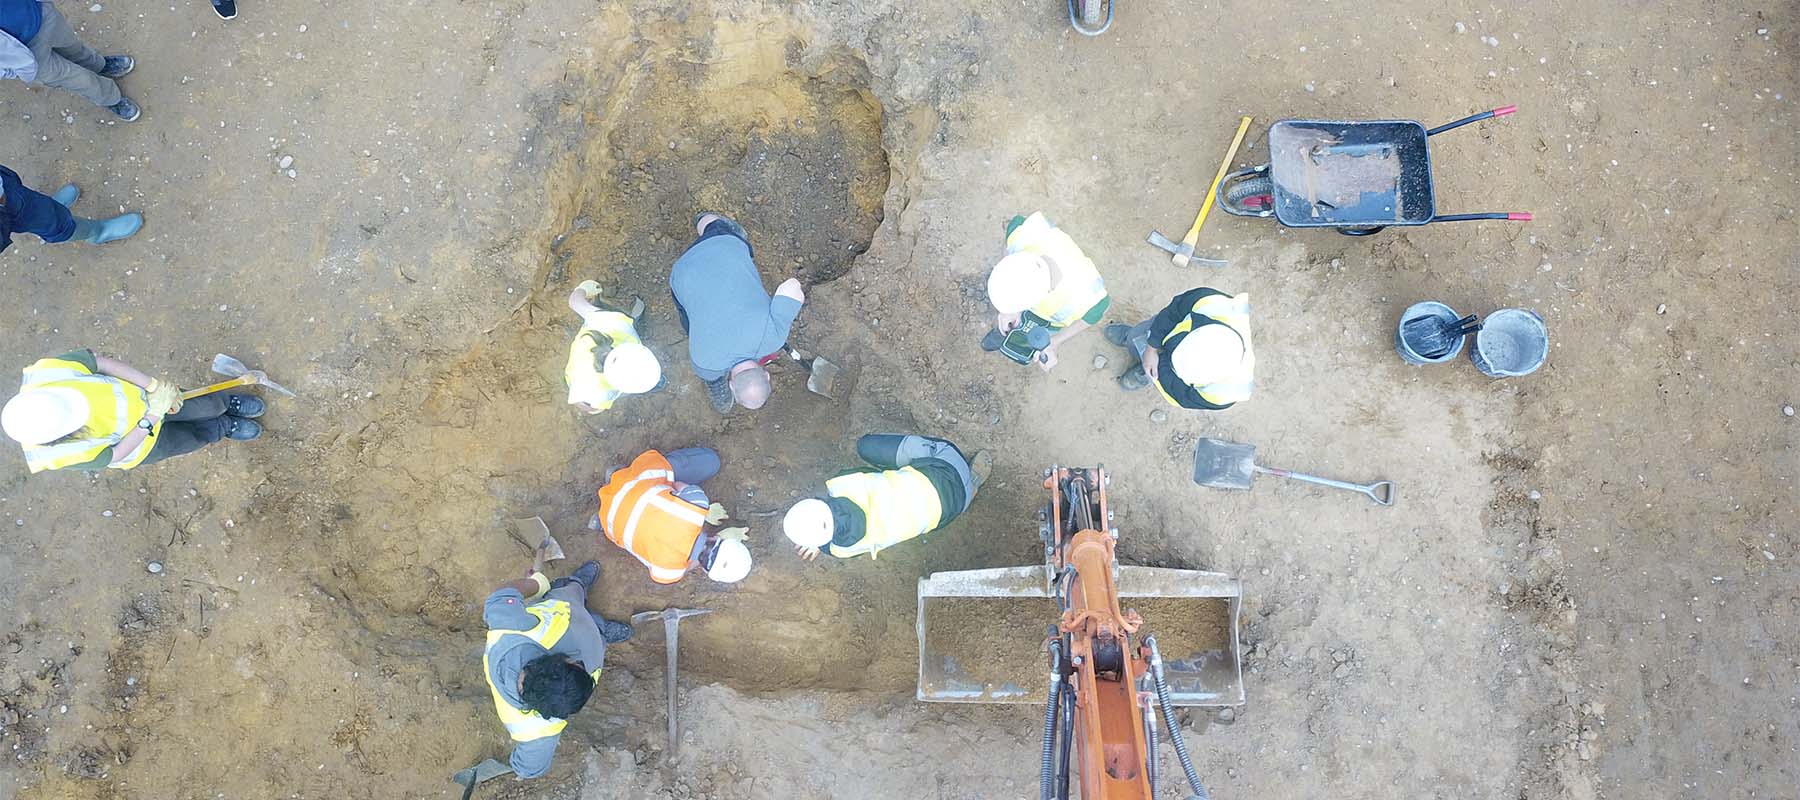 Birdseye view of construction workers digging